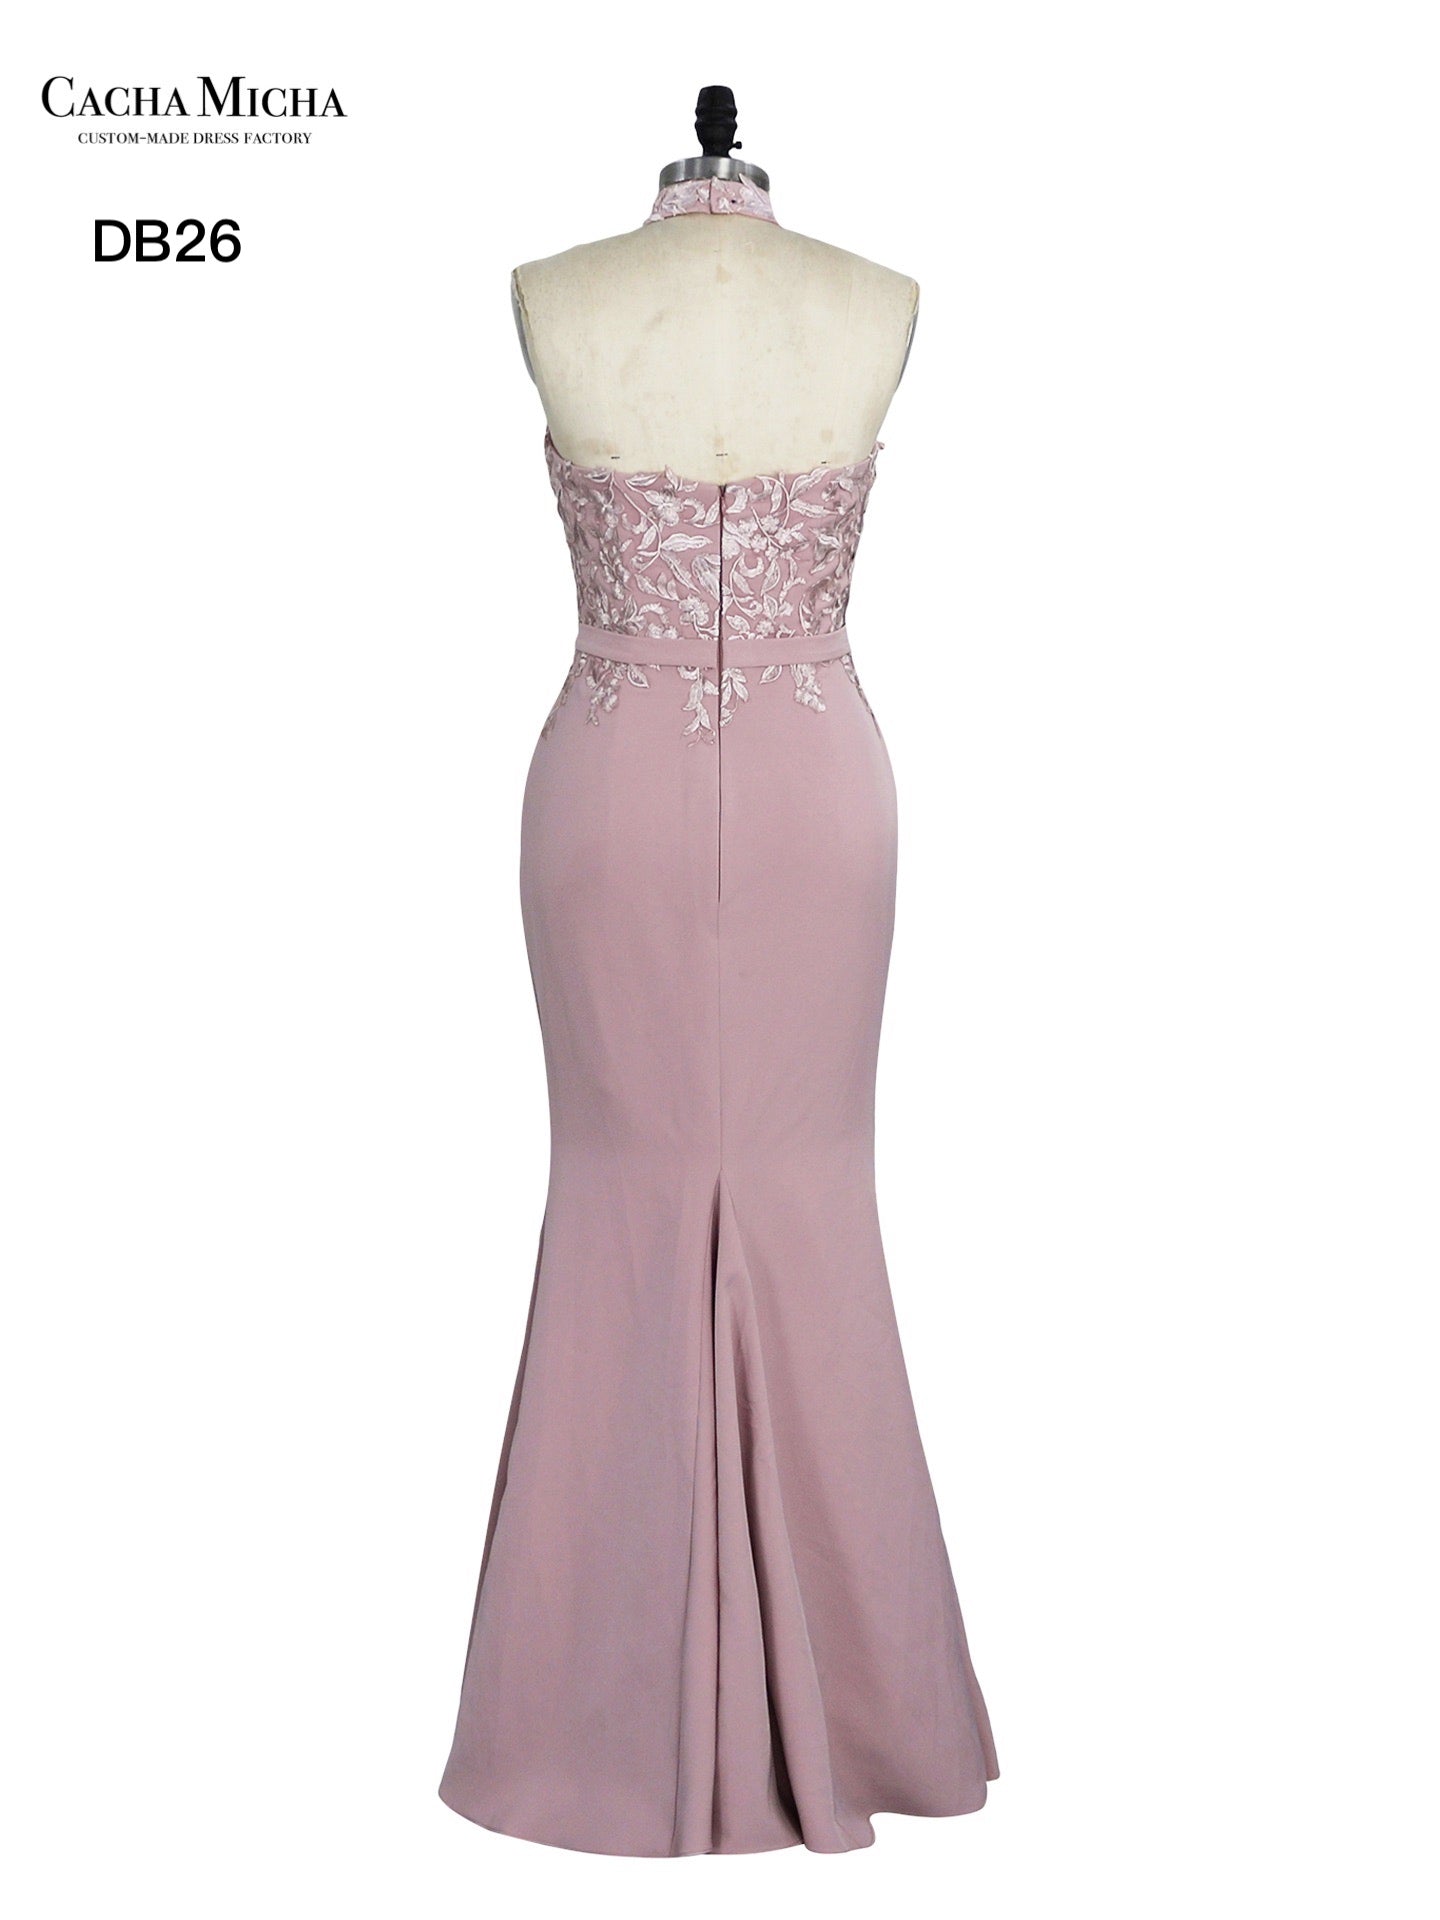 Halter Neck Lace Top Dusty Pink Crepe Bridesmaid Dress DB26